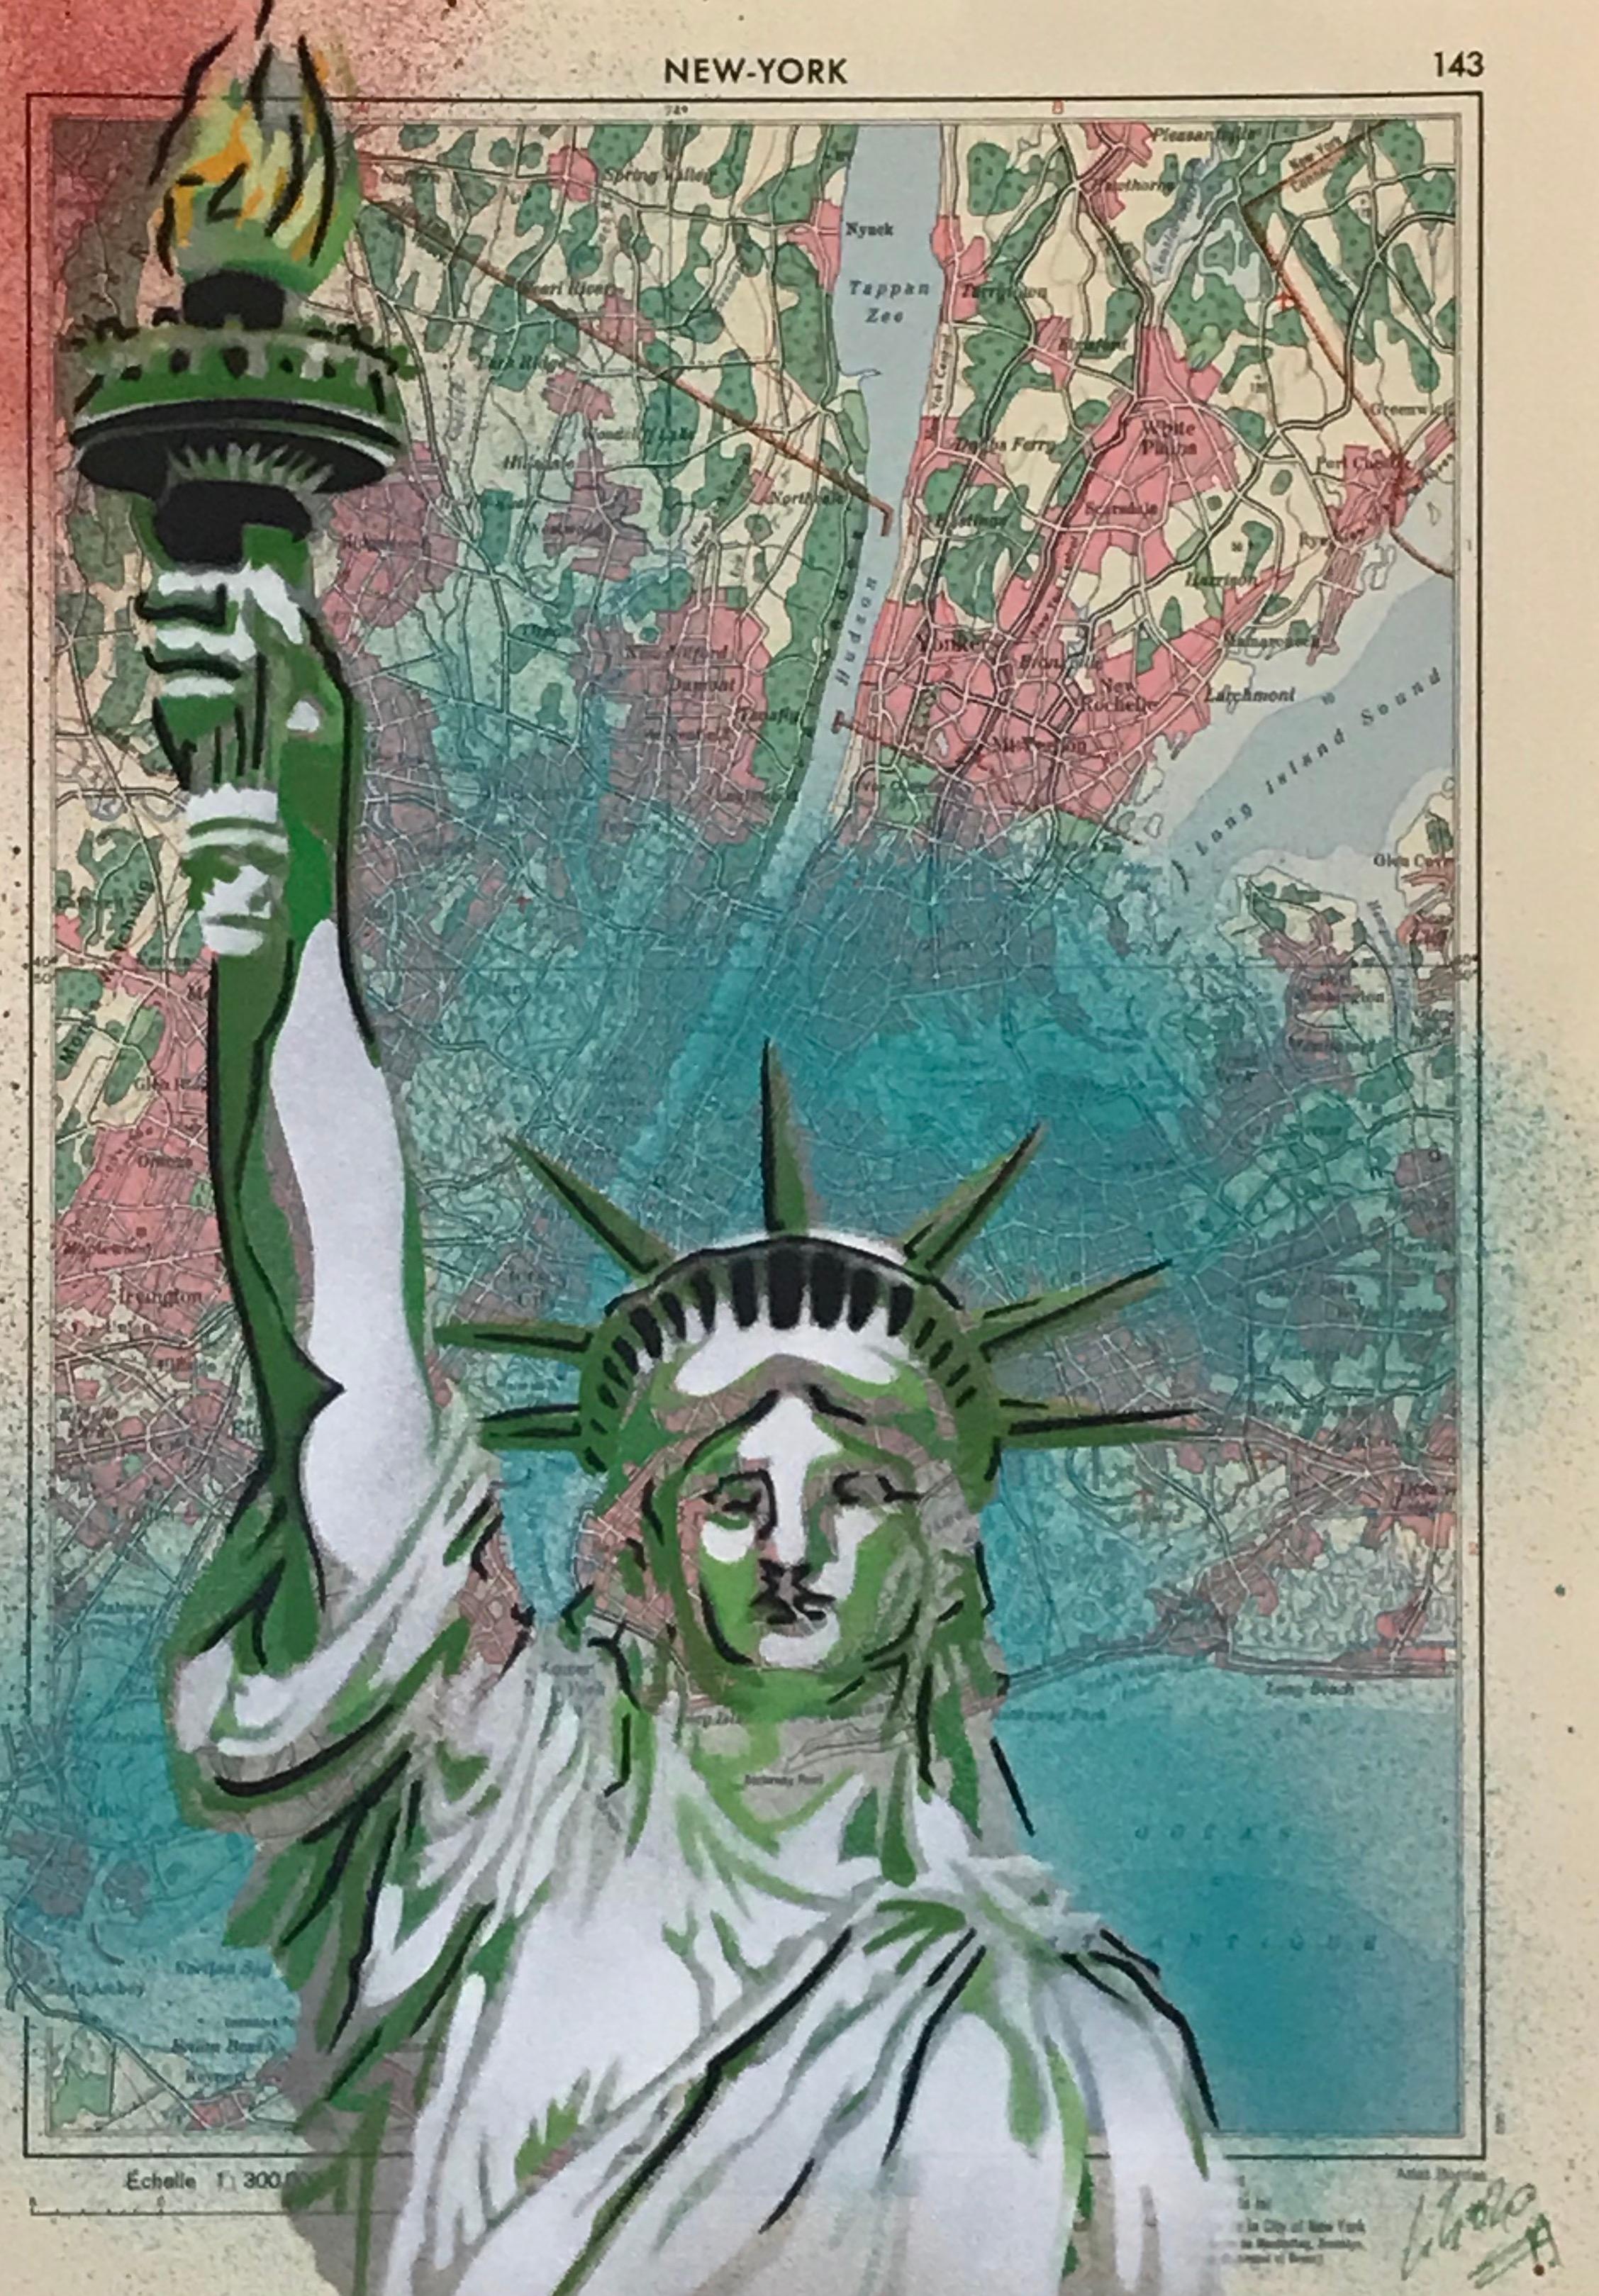 Christophe Stouvenel
Carte New York
Multi-layered stencils on 1958 geography atlas map
Creation date 2020
Format 21 x 30.2 cm
Signed lower right and countersigned on the reverse.
PRICE: 190 euros